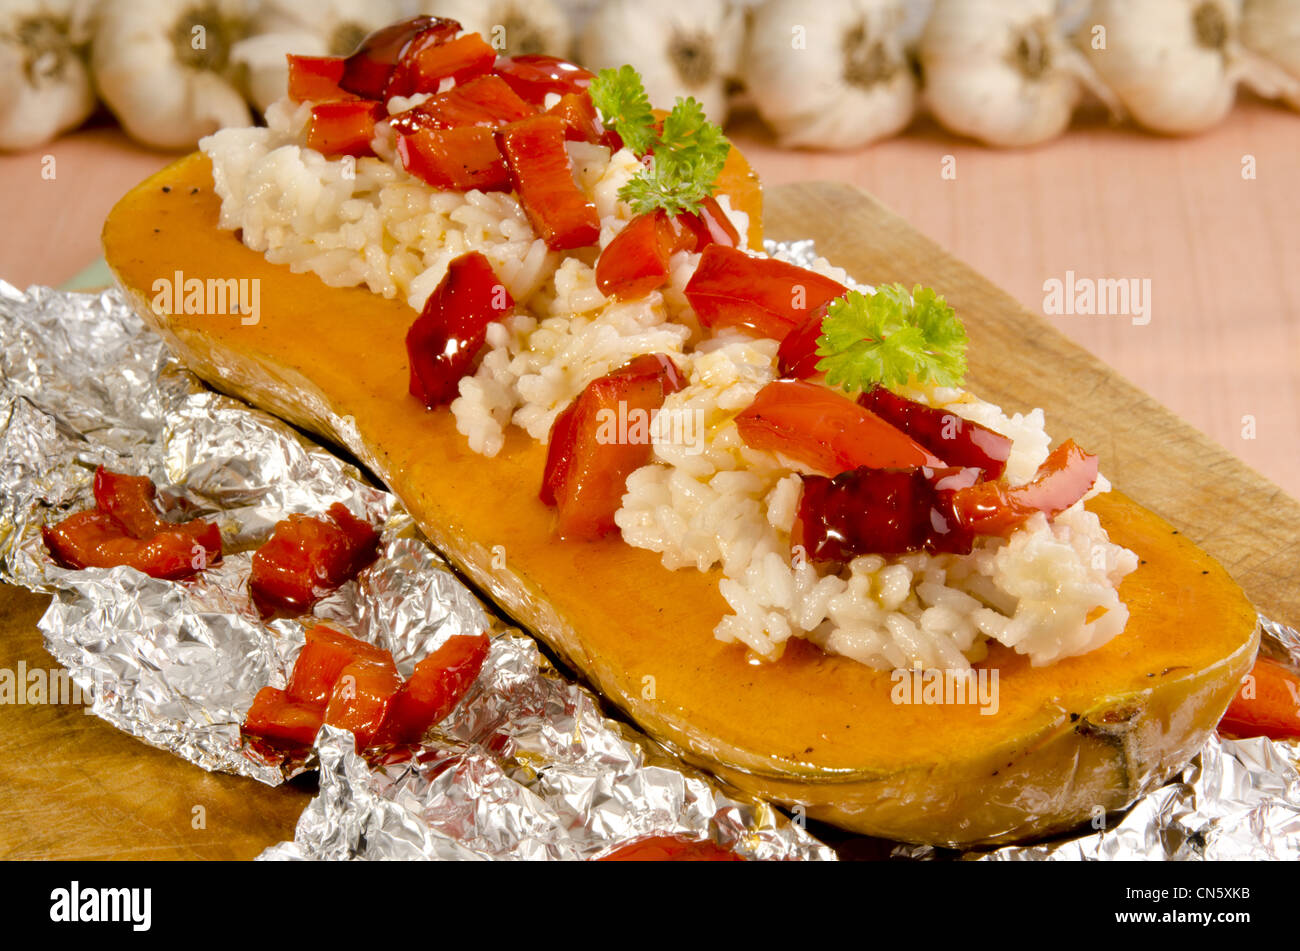 baked butternut stuffed with rice and red peppers Stock Photo